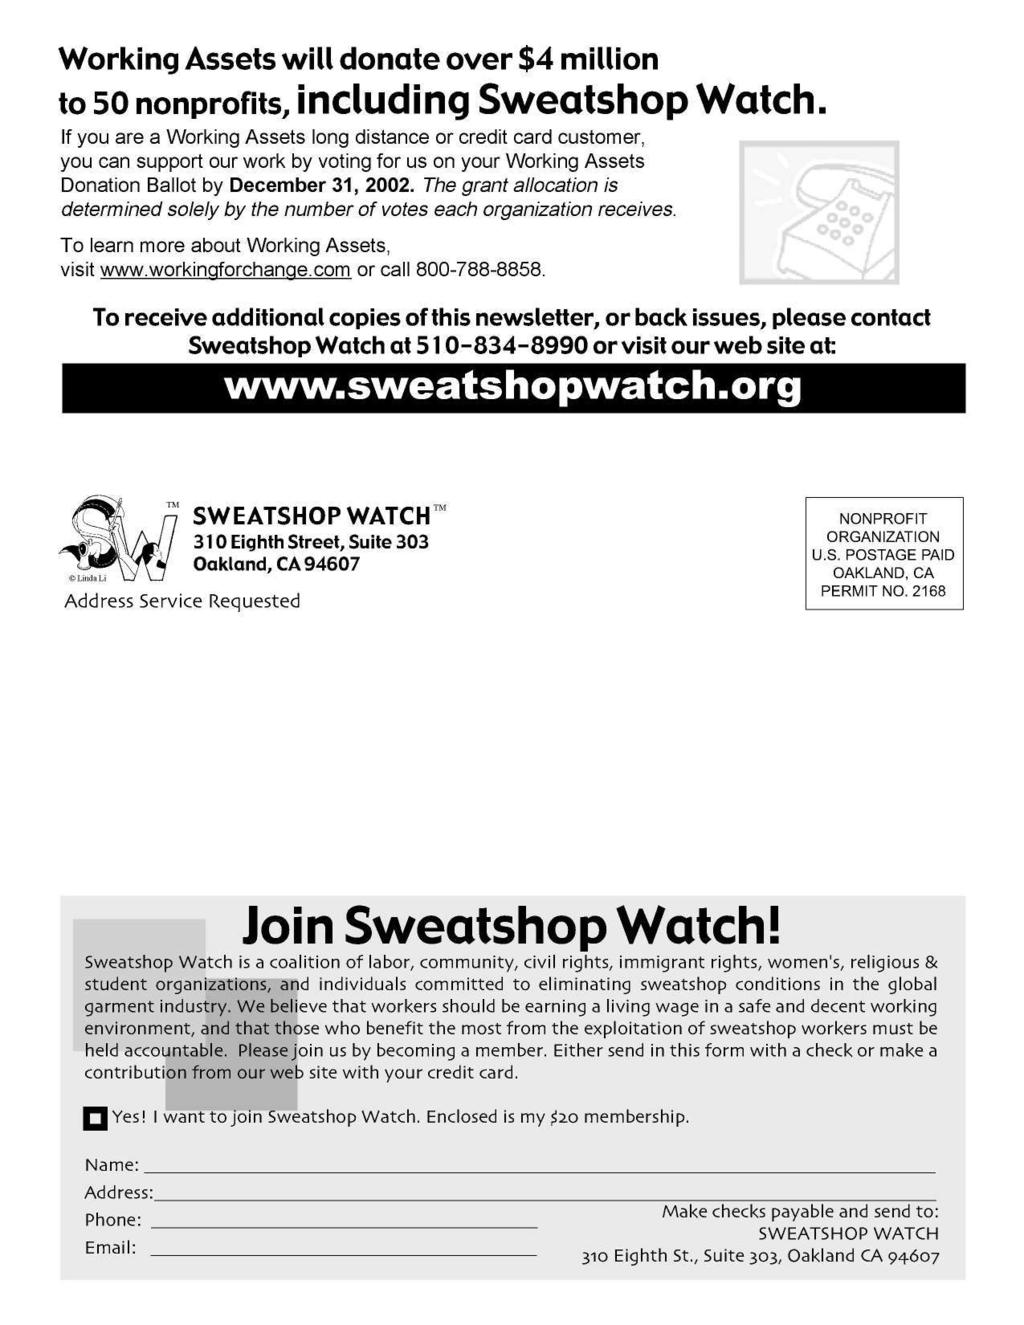 Working Assets will donate over $4 million to 50 nonprofits,including Sweatshop Watch.